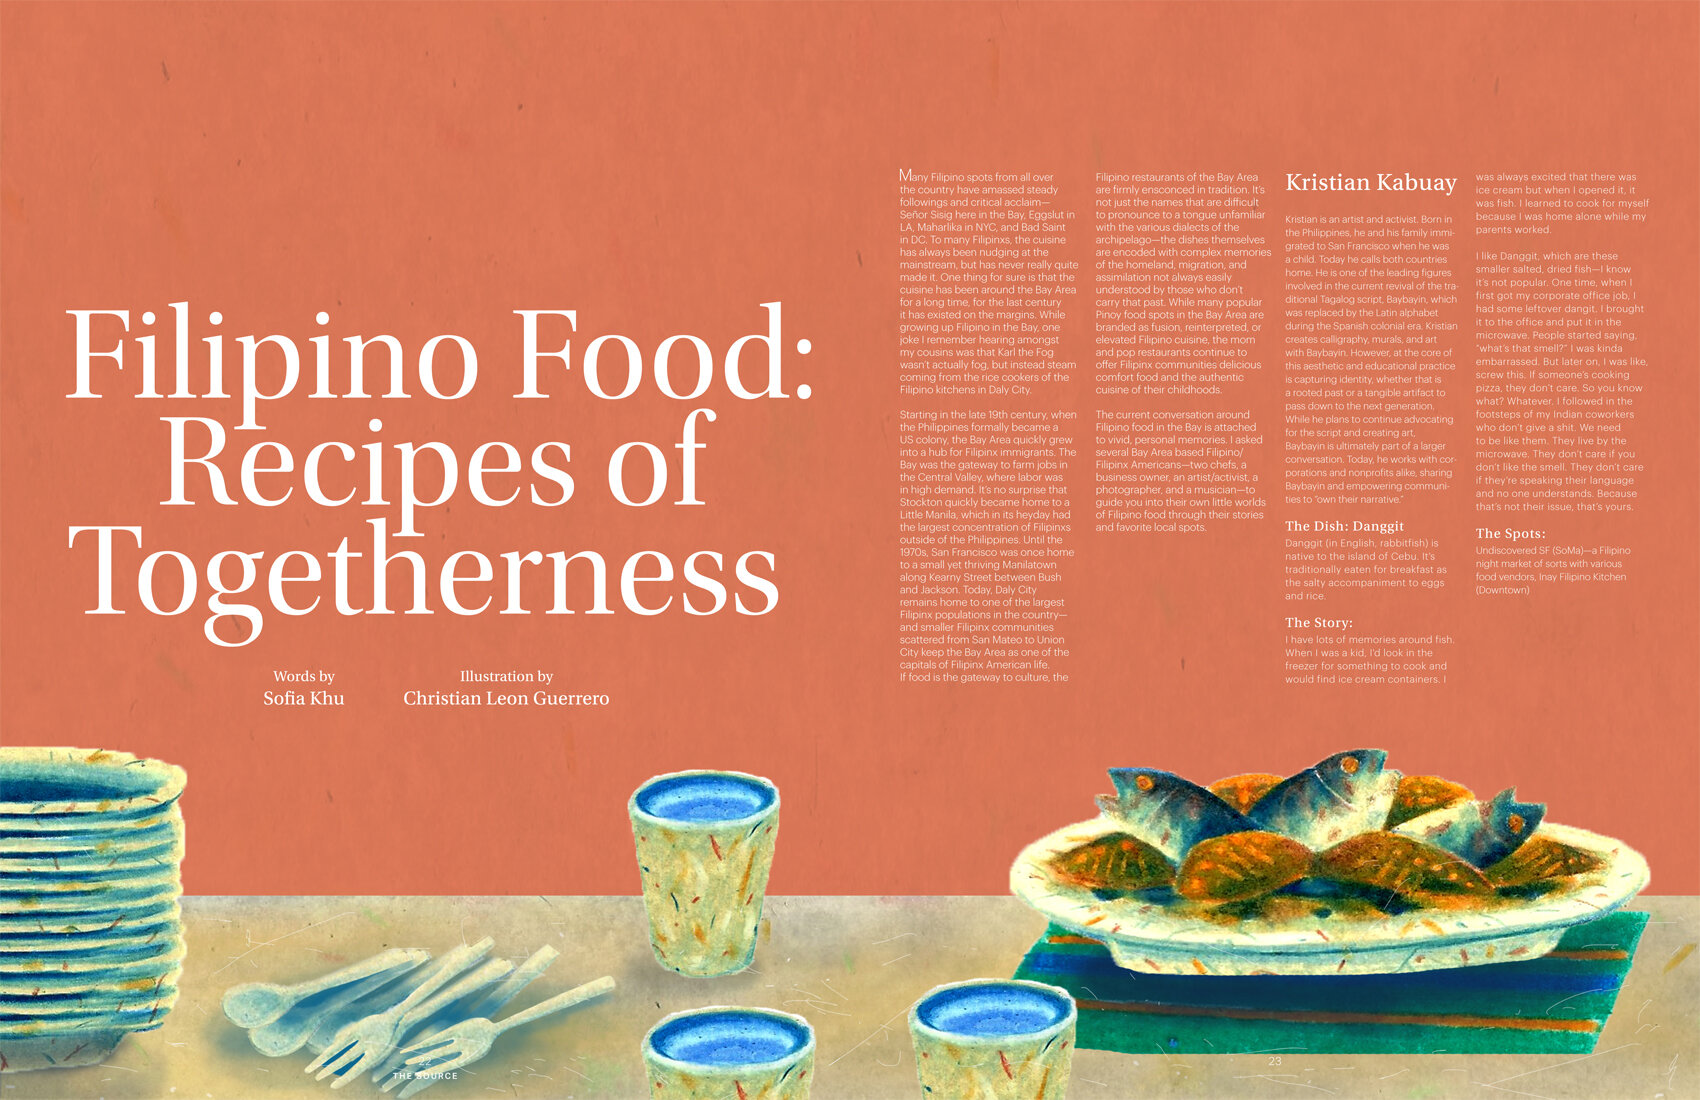 "Filipino Food: Recipes of Togetherness" 